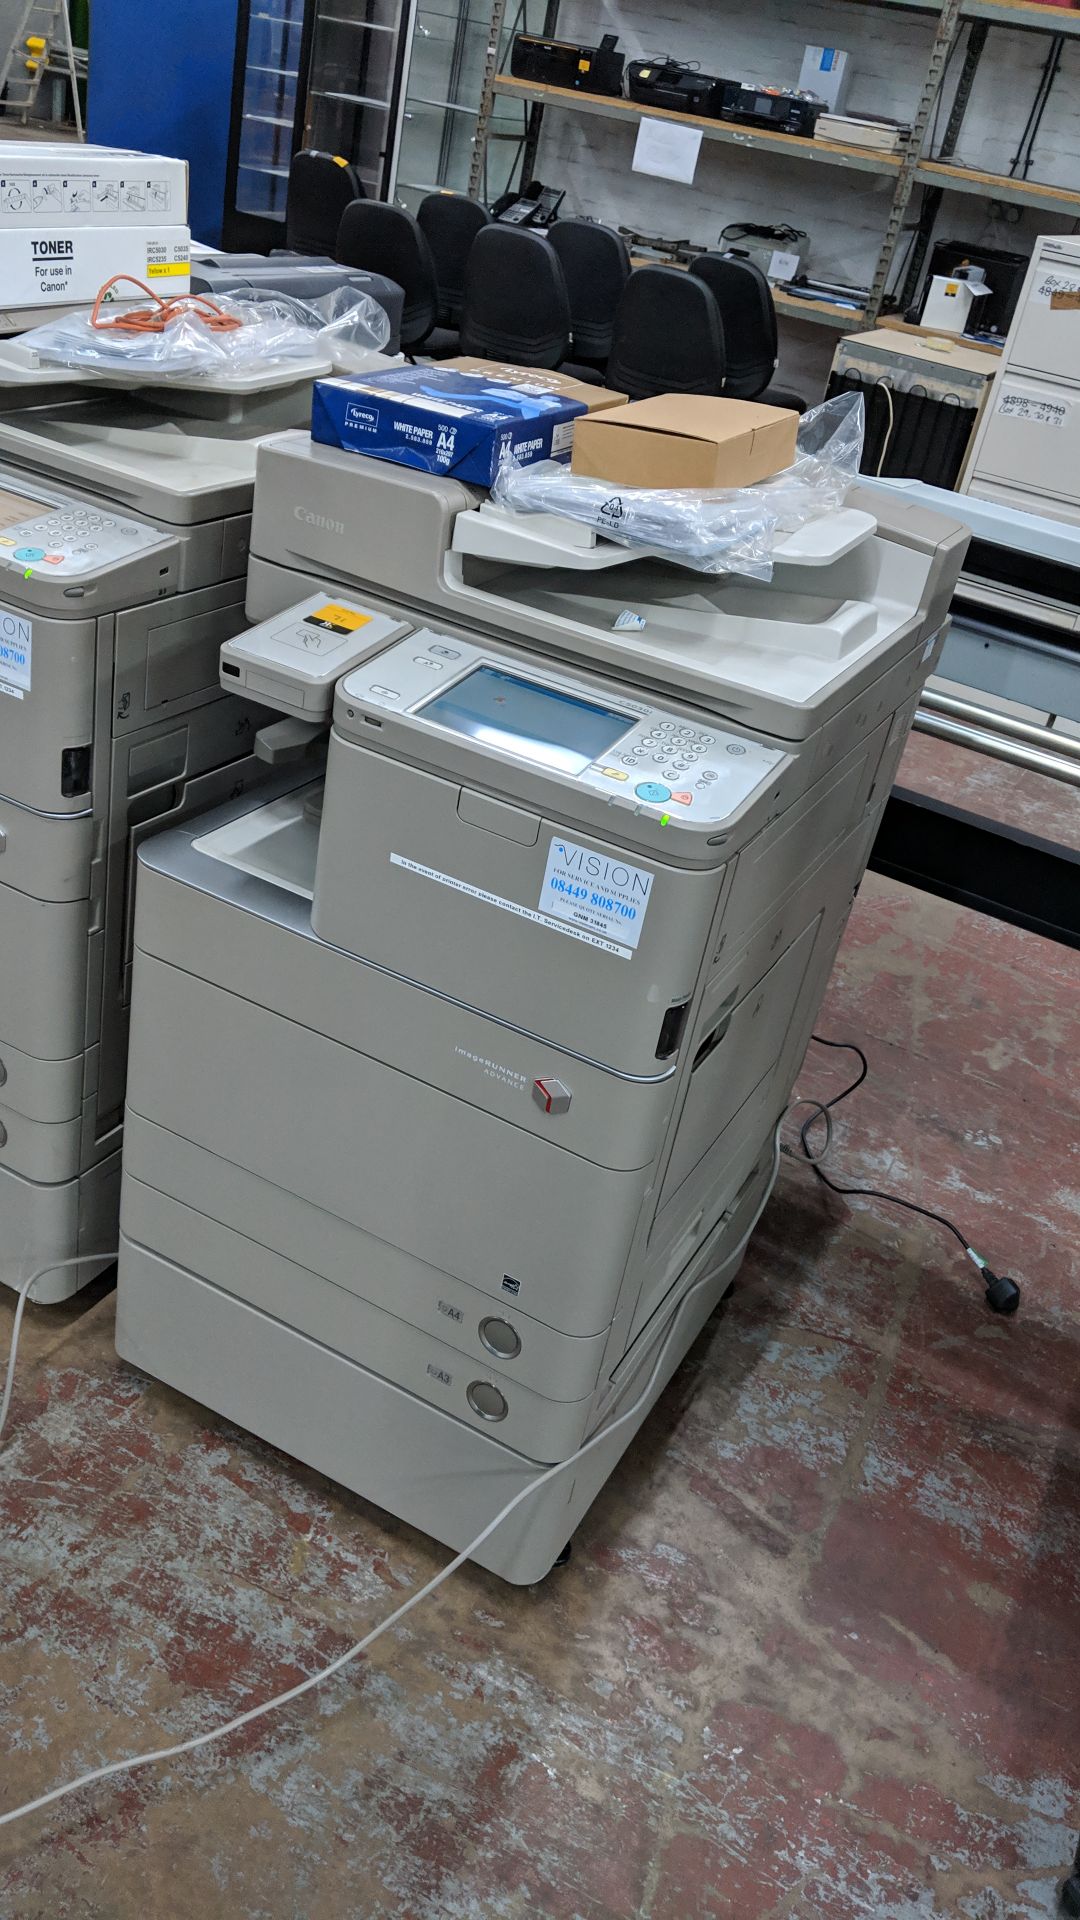 Canon imageRUNNER Advance model C5030i floorstanding copier with auto docufeed & pedestal - Image 5 of 11